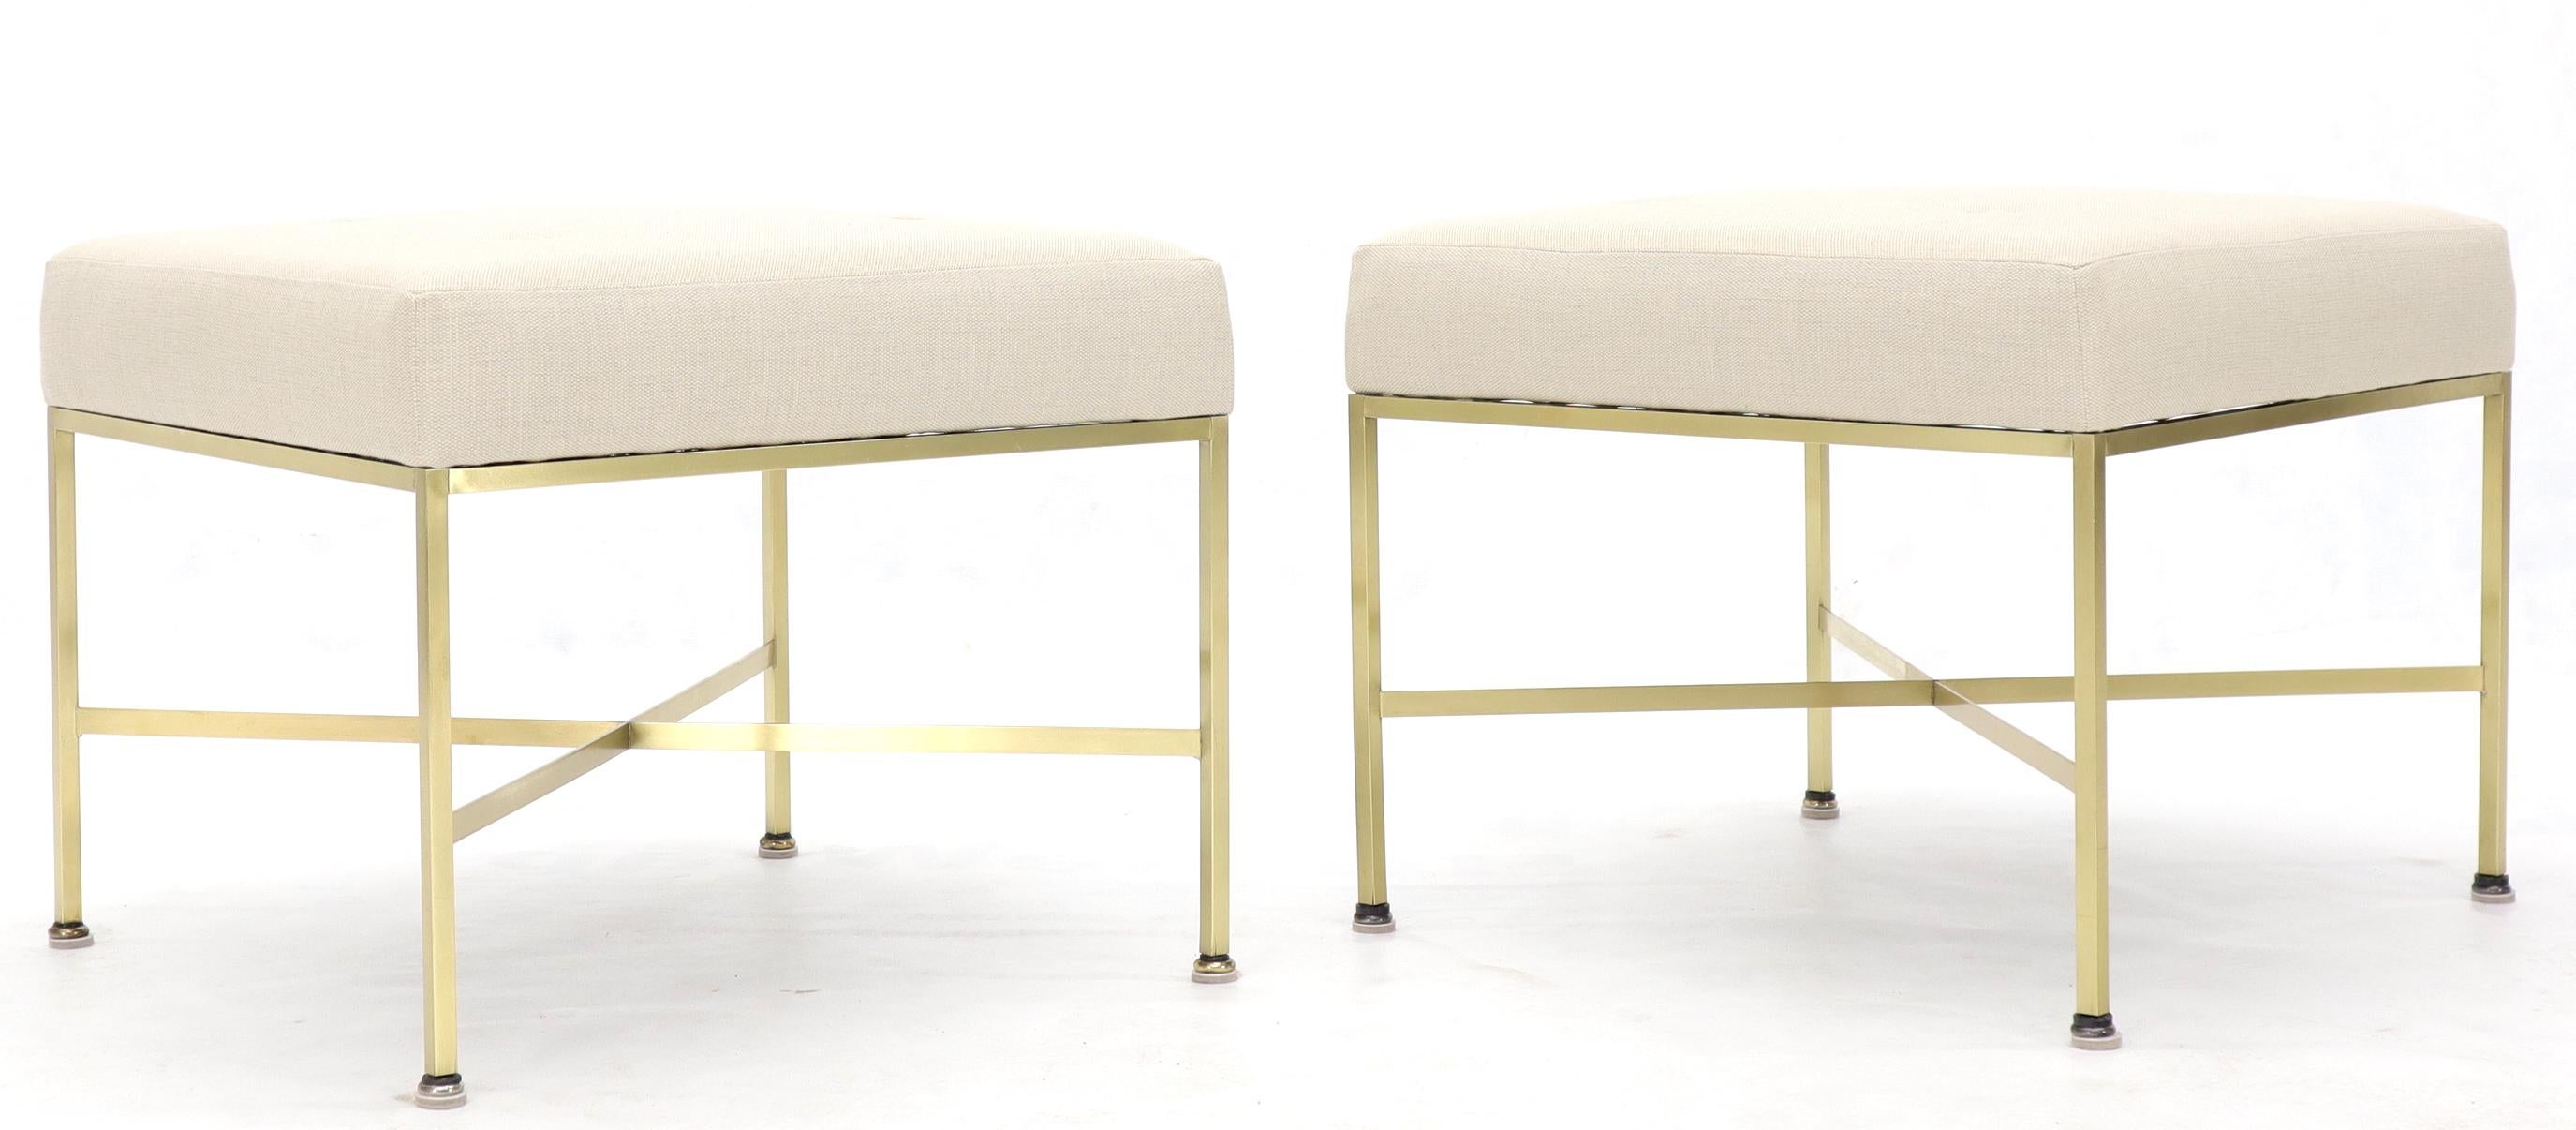 Mid-Century Modern Pair of New Upholstery Square Brass Frames Benches Stools by Paul McCobb